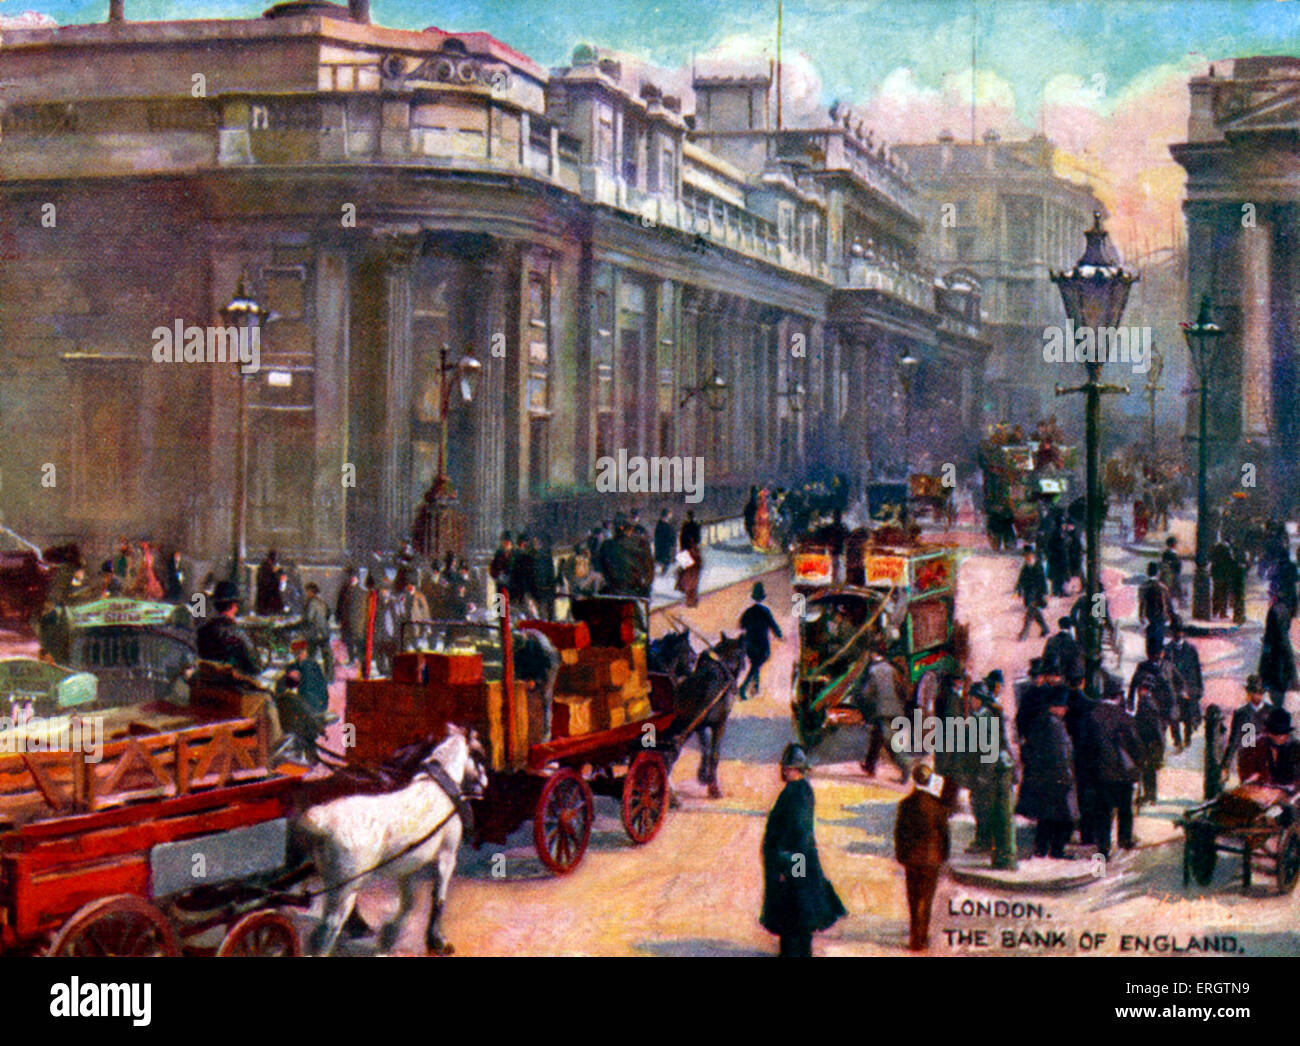 London -  Bank of England.  In early 1900s. Horsedrawn carts, trams, top hats. Lamp post. Pedestrians . Stock Photo